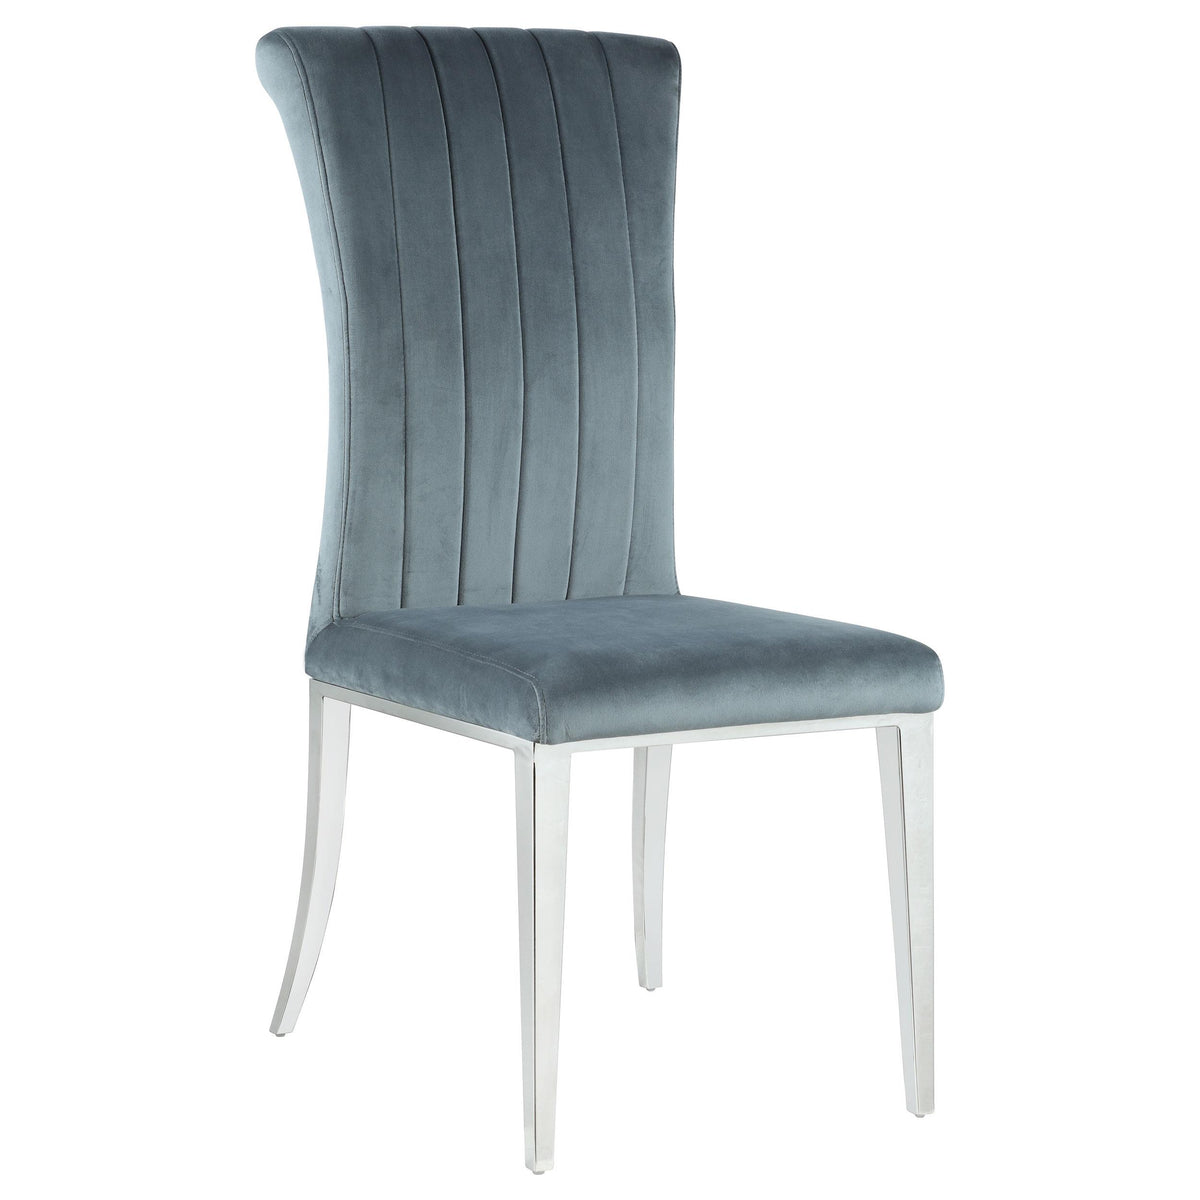 Beaufort Upholstered Curved Back Side Chairs Dark Grey (Set of 2)  Half Price Furniture